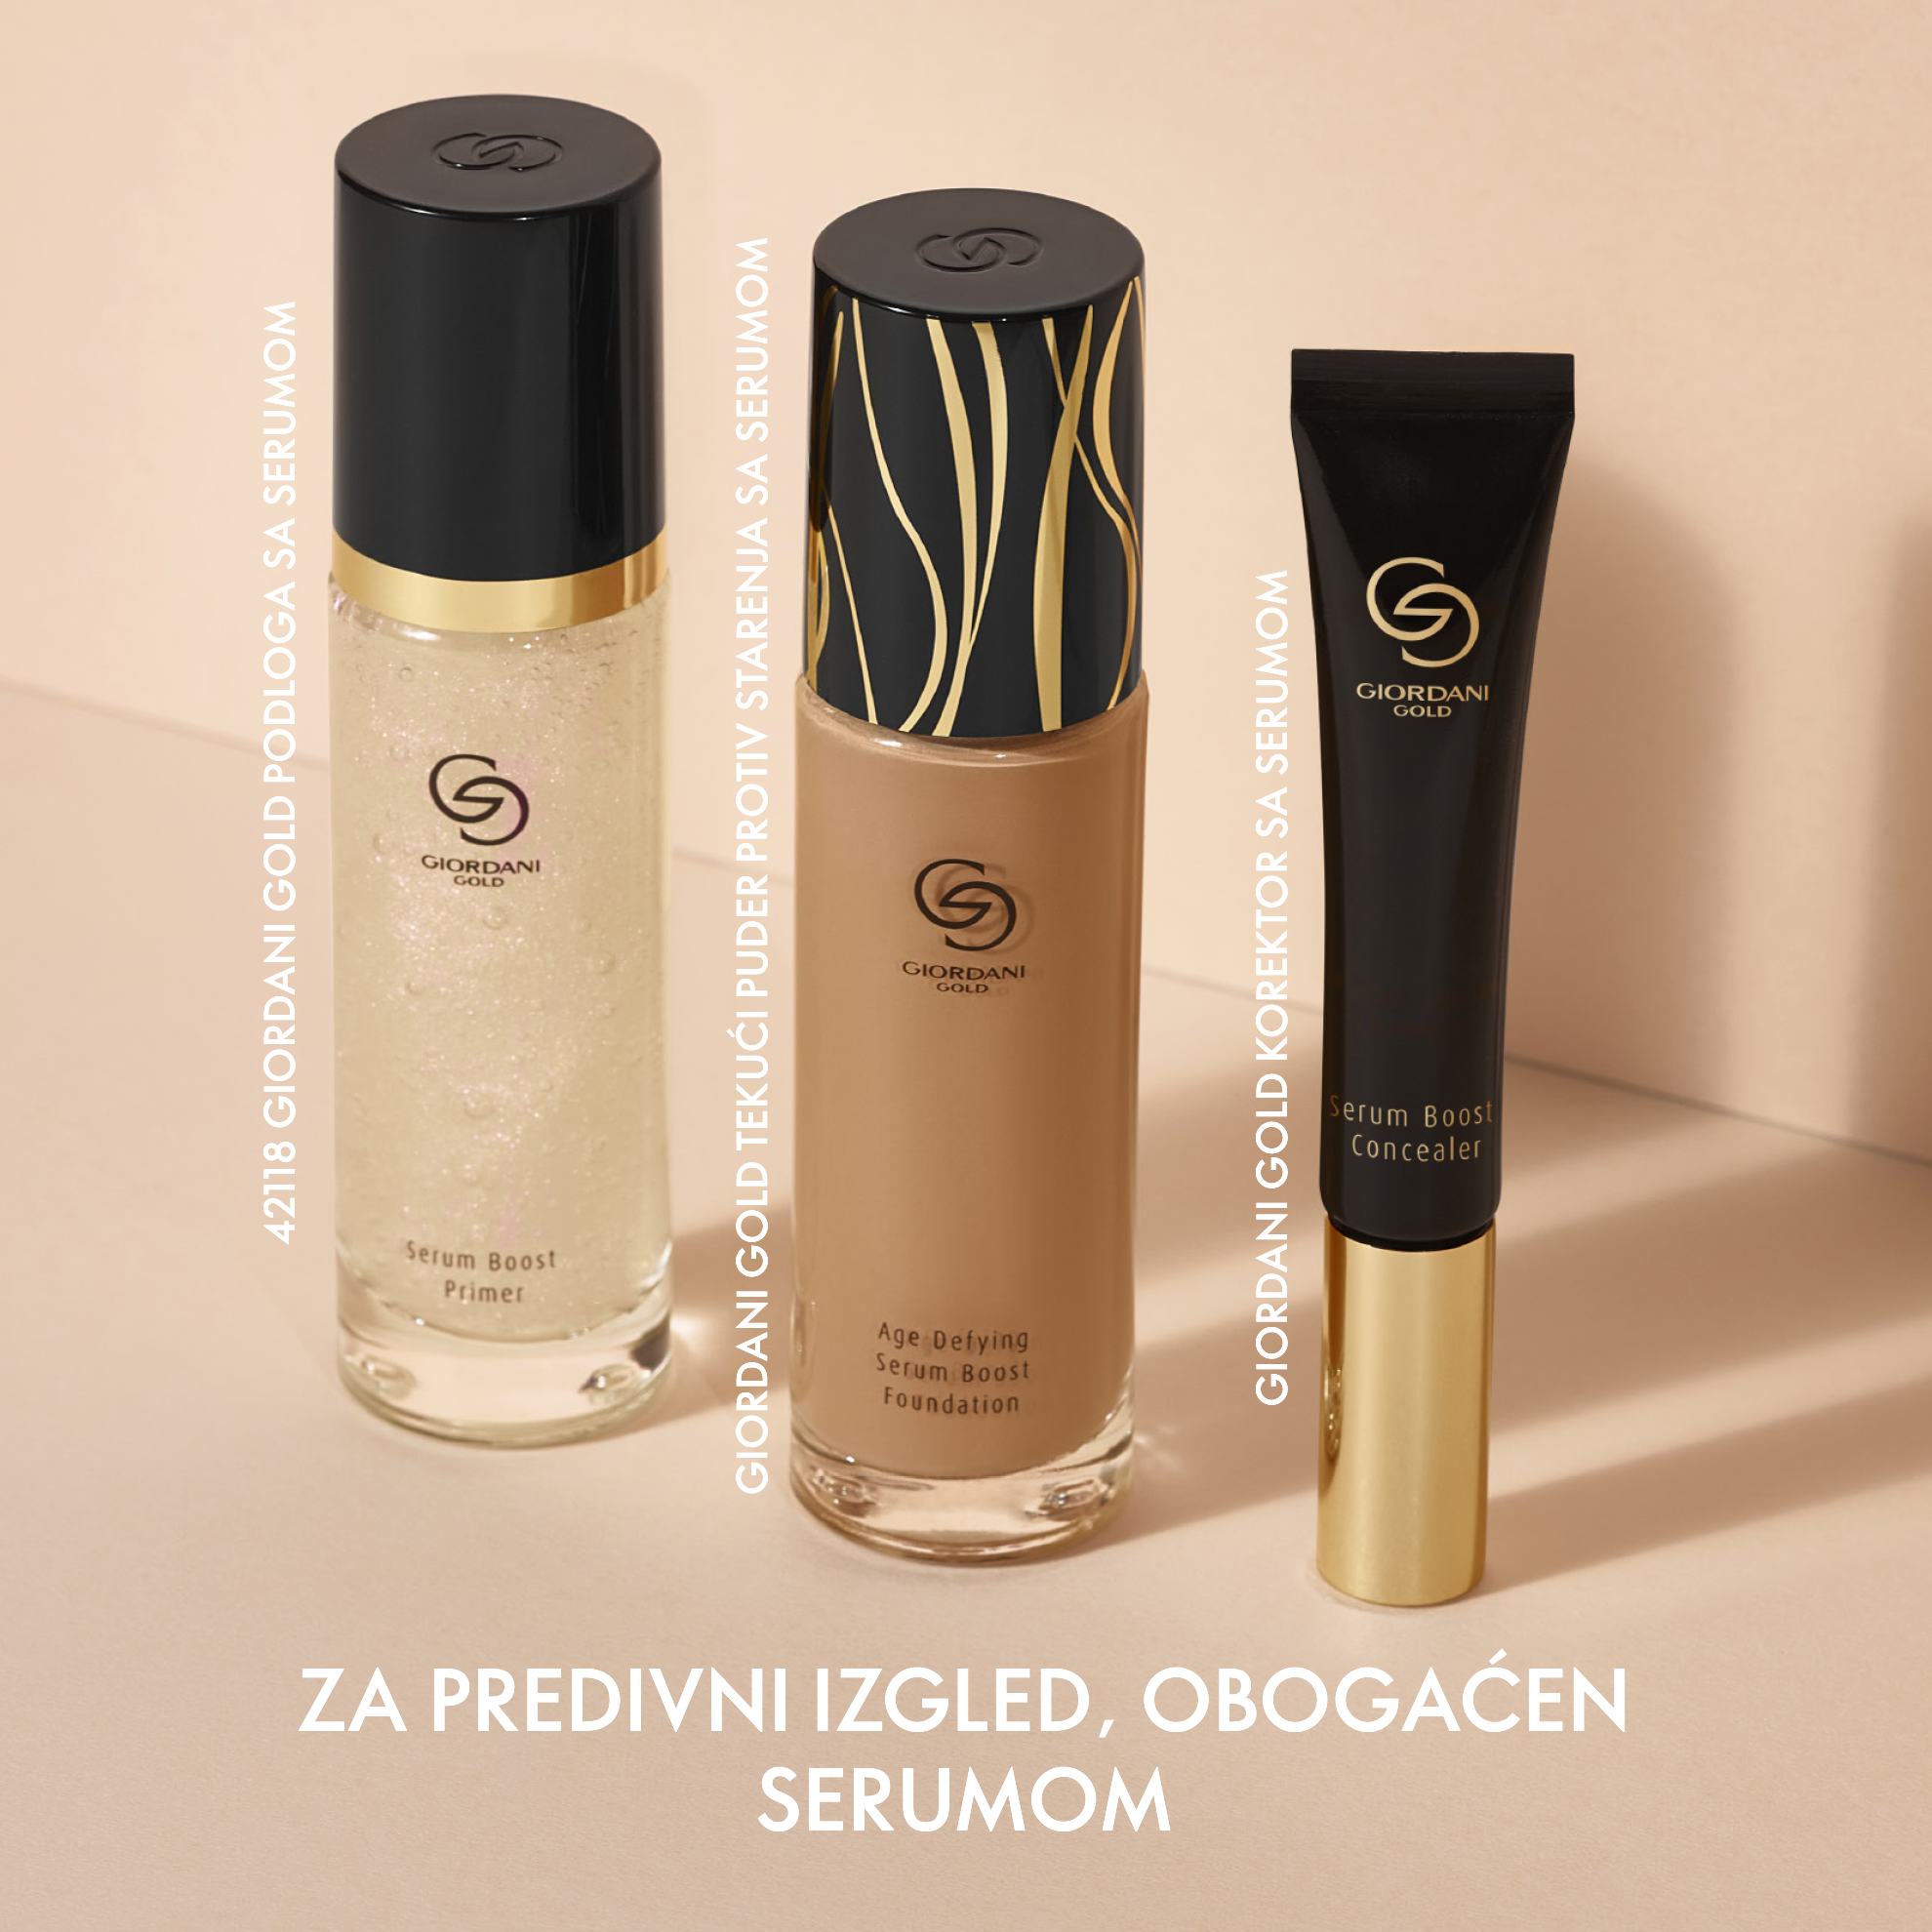 https://media-cdn.oriflame.com/productImage?externalMediaId=product-management-media%2fProducts%2f40954%2fHR%2f40954_7.png&id=16910165&version=1